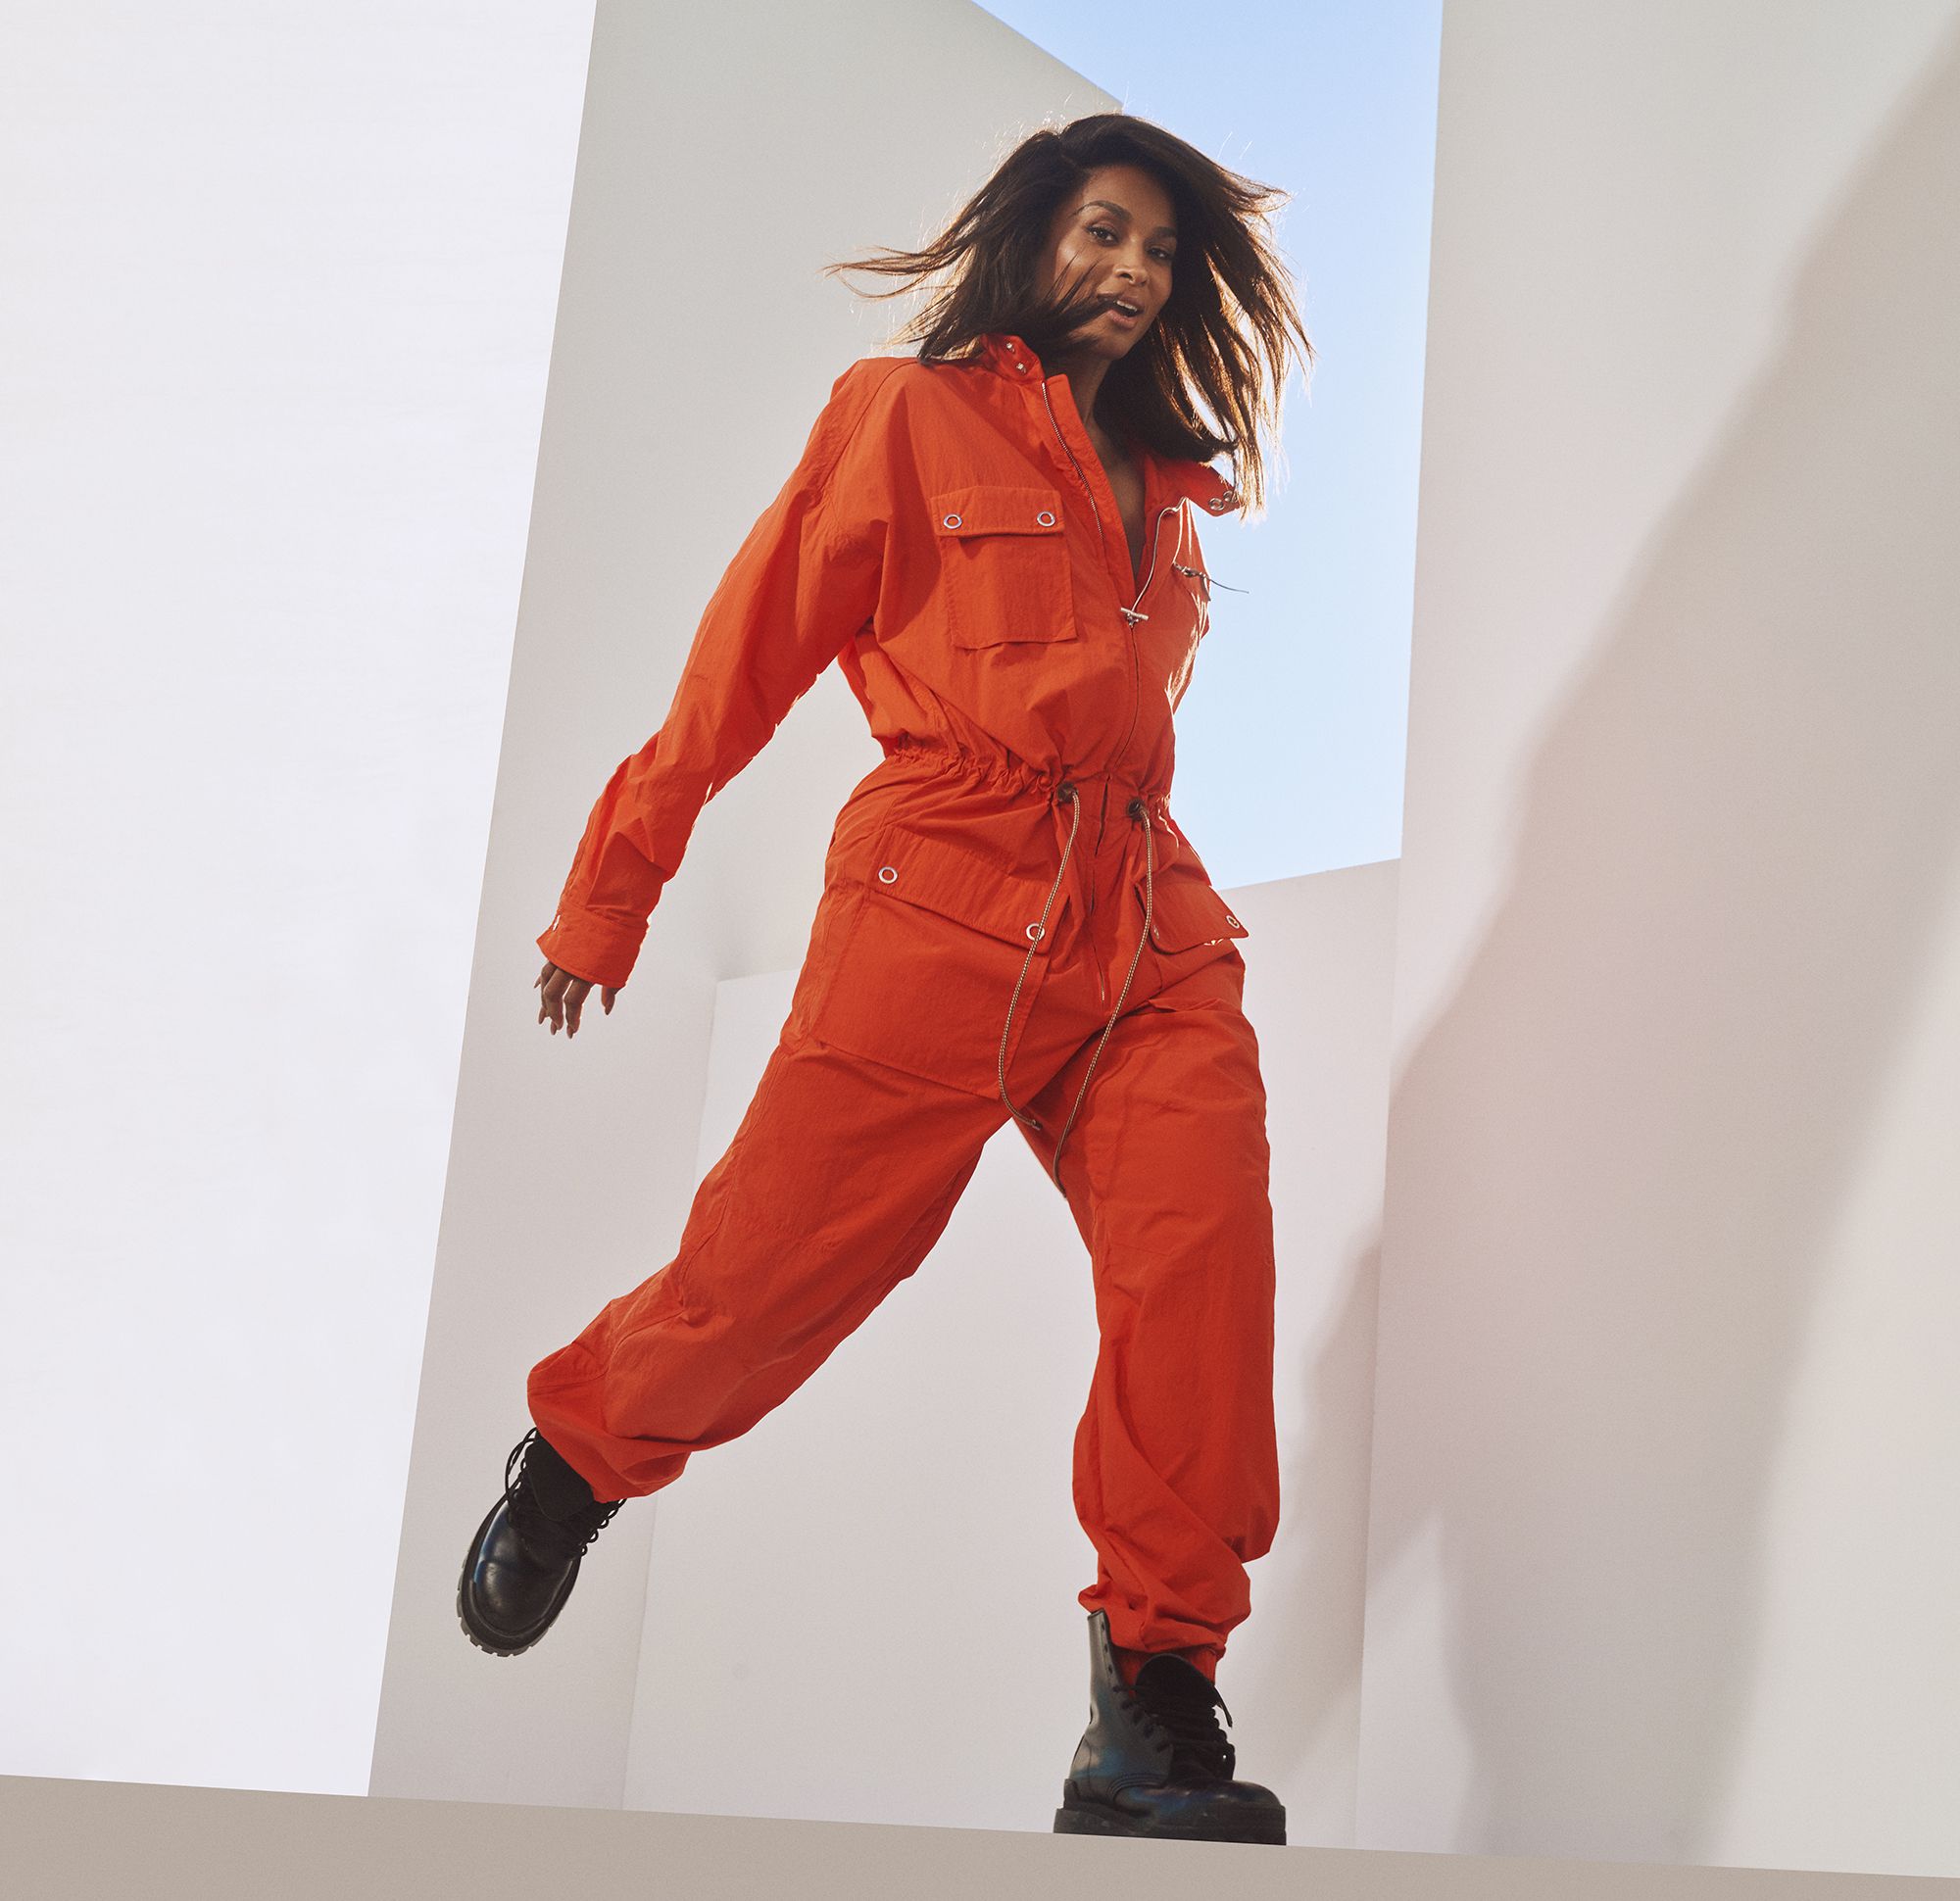 Ciara Talks Her New Music, Life Mantras, Fashion and Fitness – The